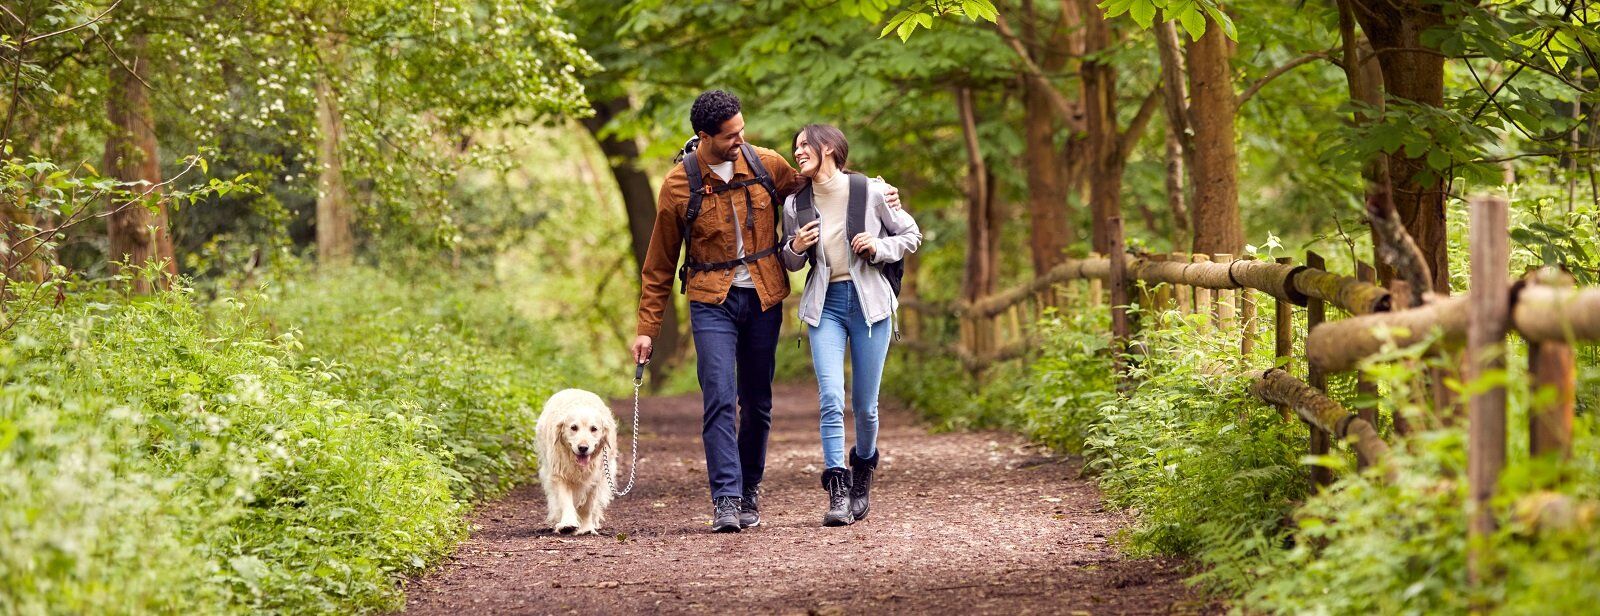 Couple with a dog hiking in the forest with hiking gear